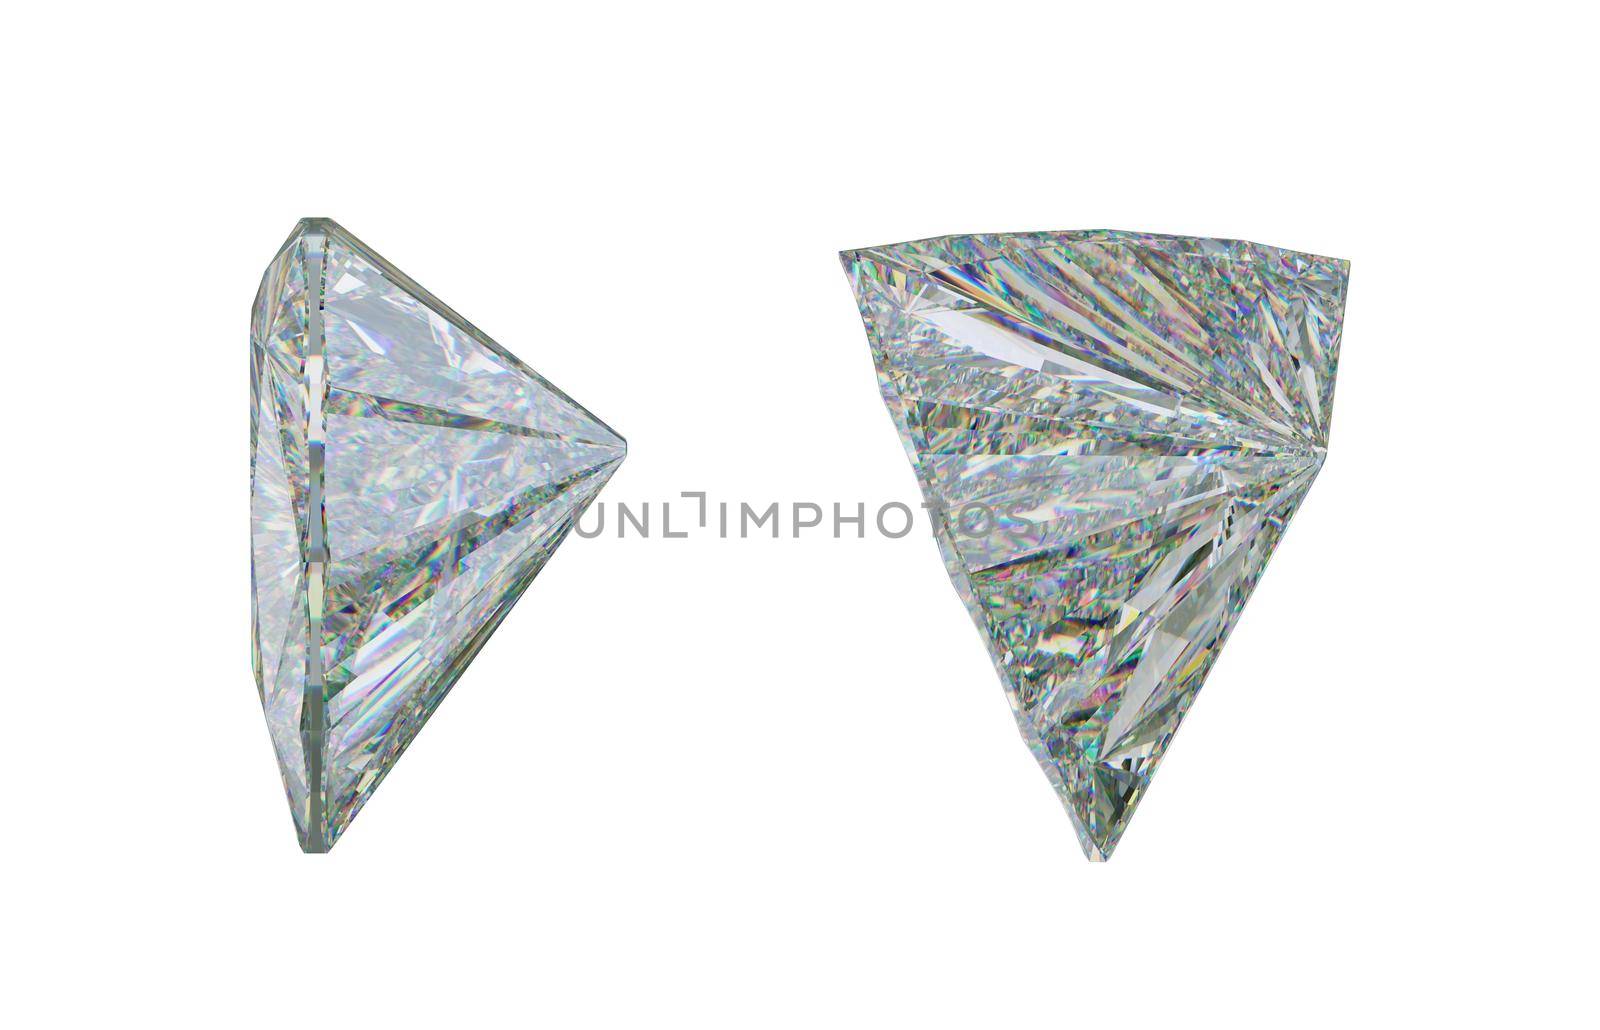 Side view of trillion cut diamond or gemstone on white by Arsgera